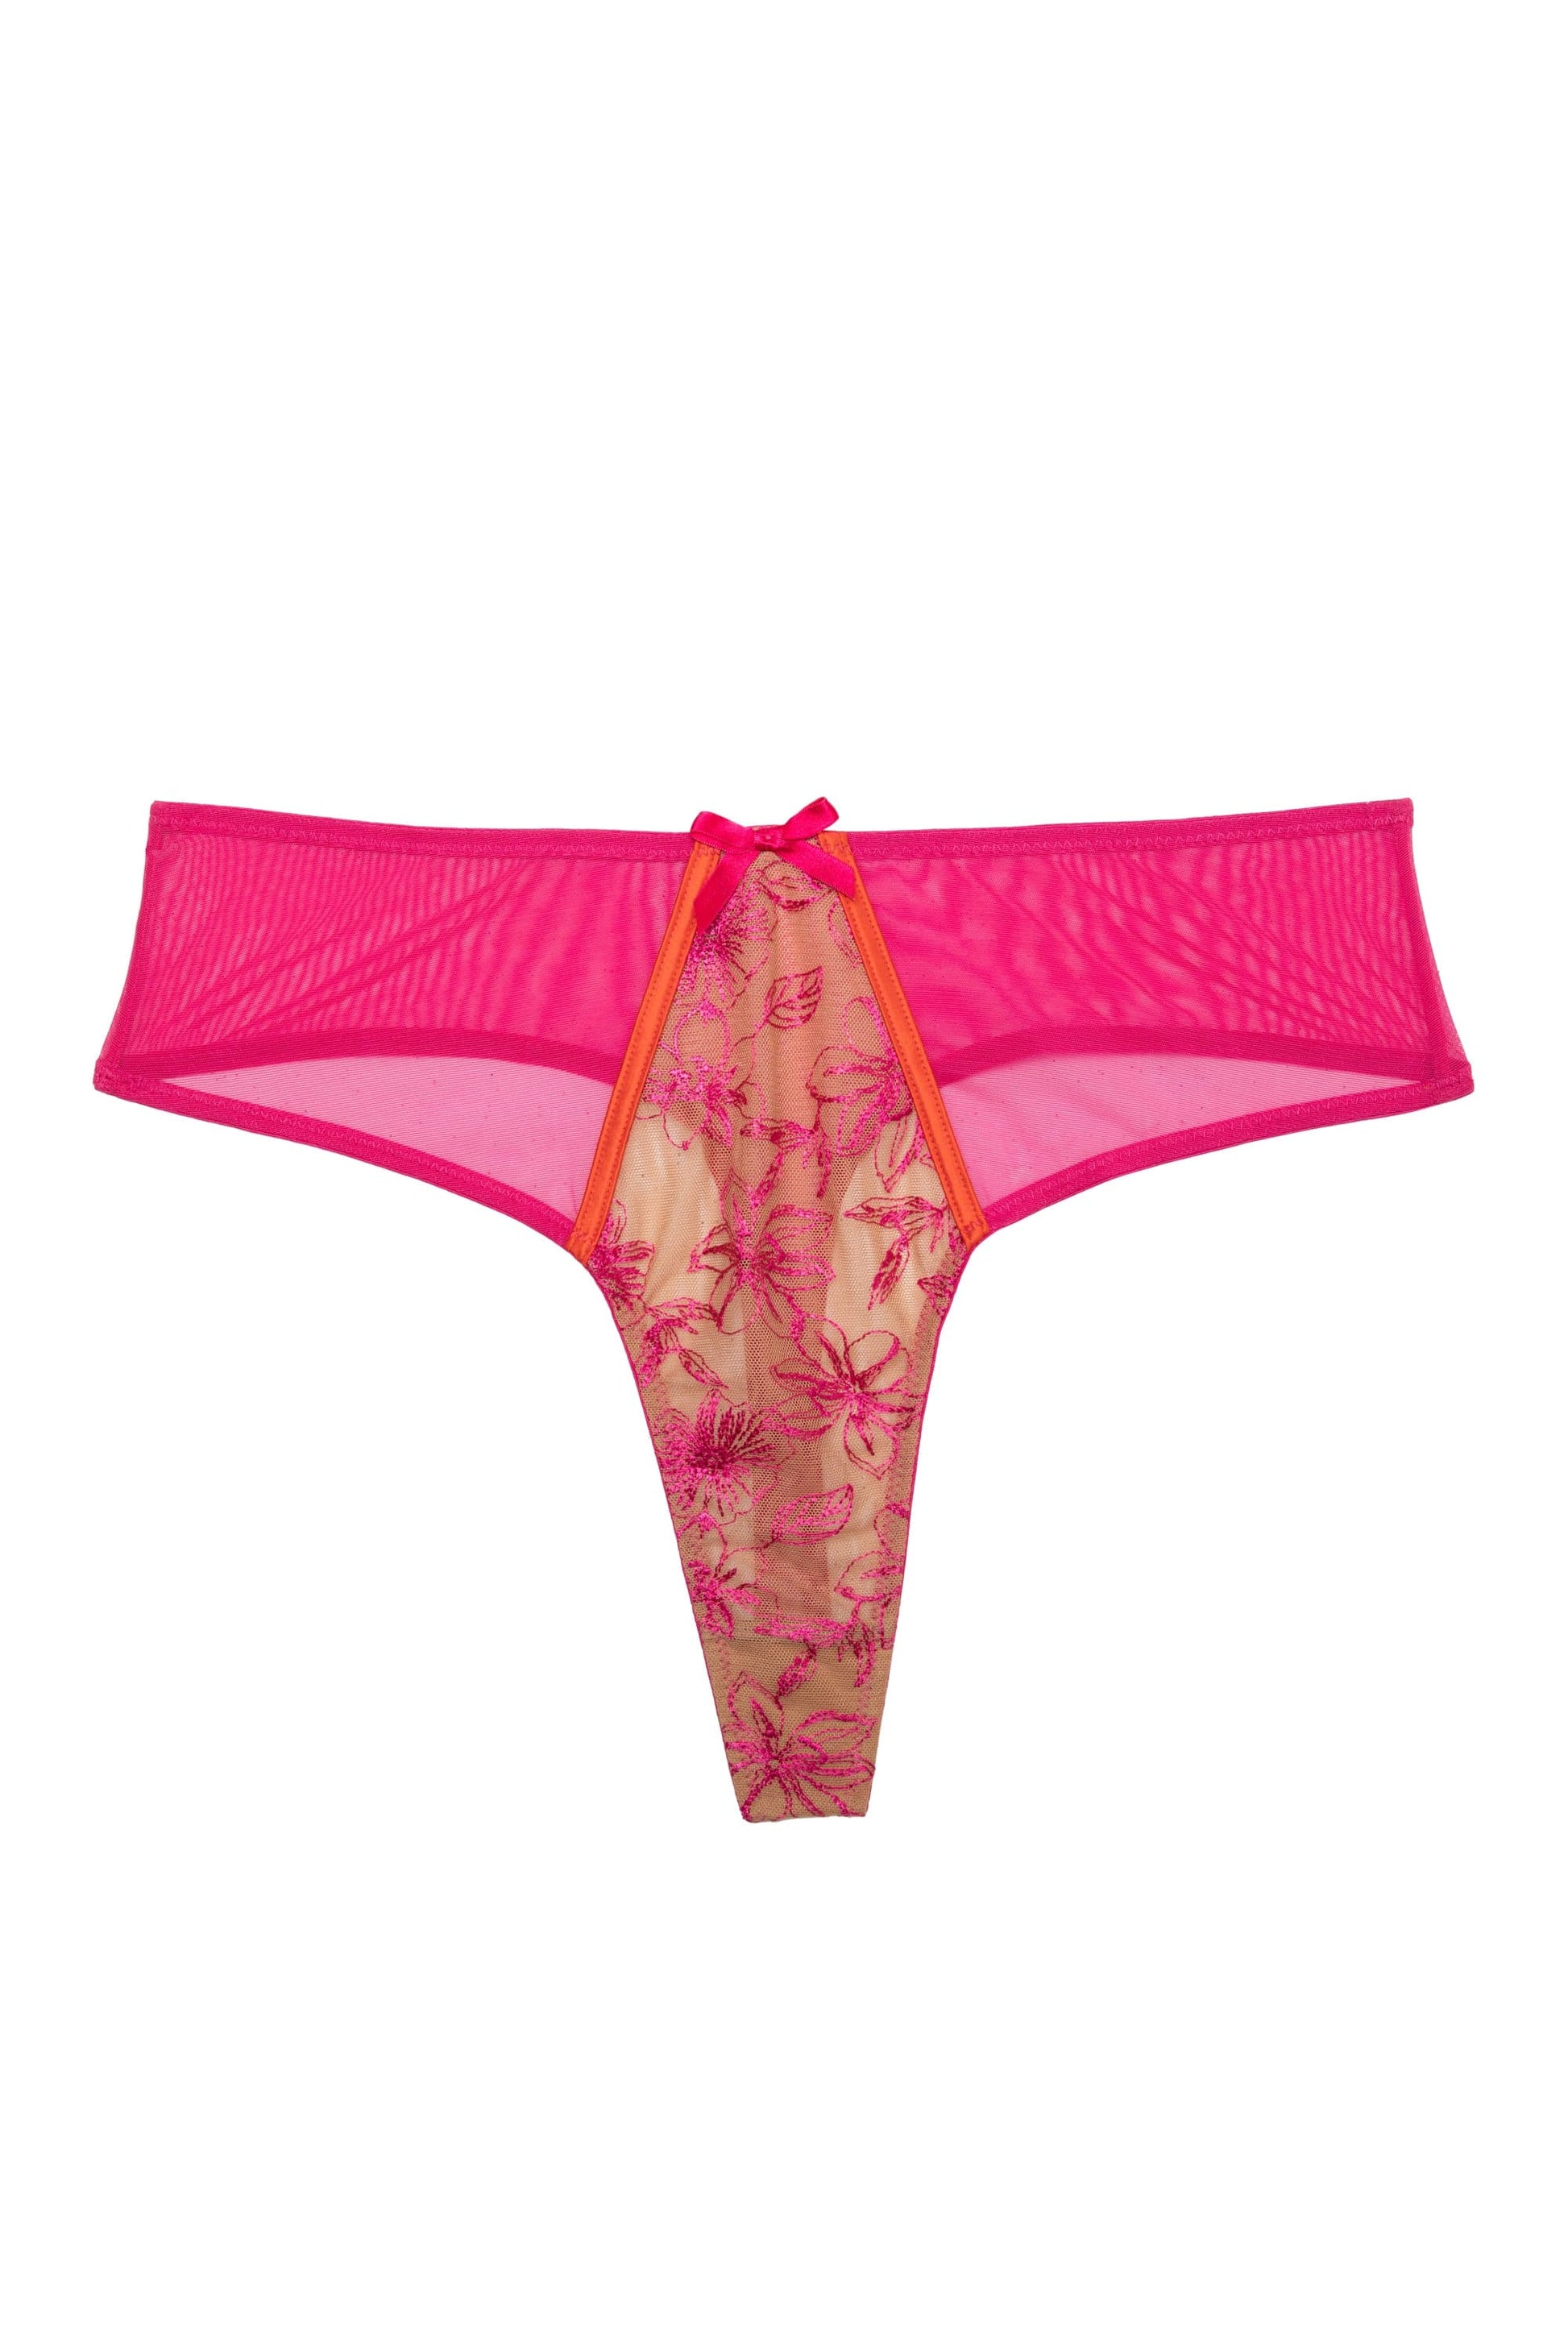 Olivia Pink Embroidery Lingerie - Toronto Lingerie - Playful